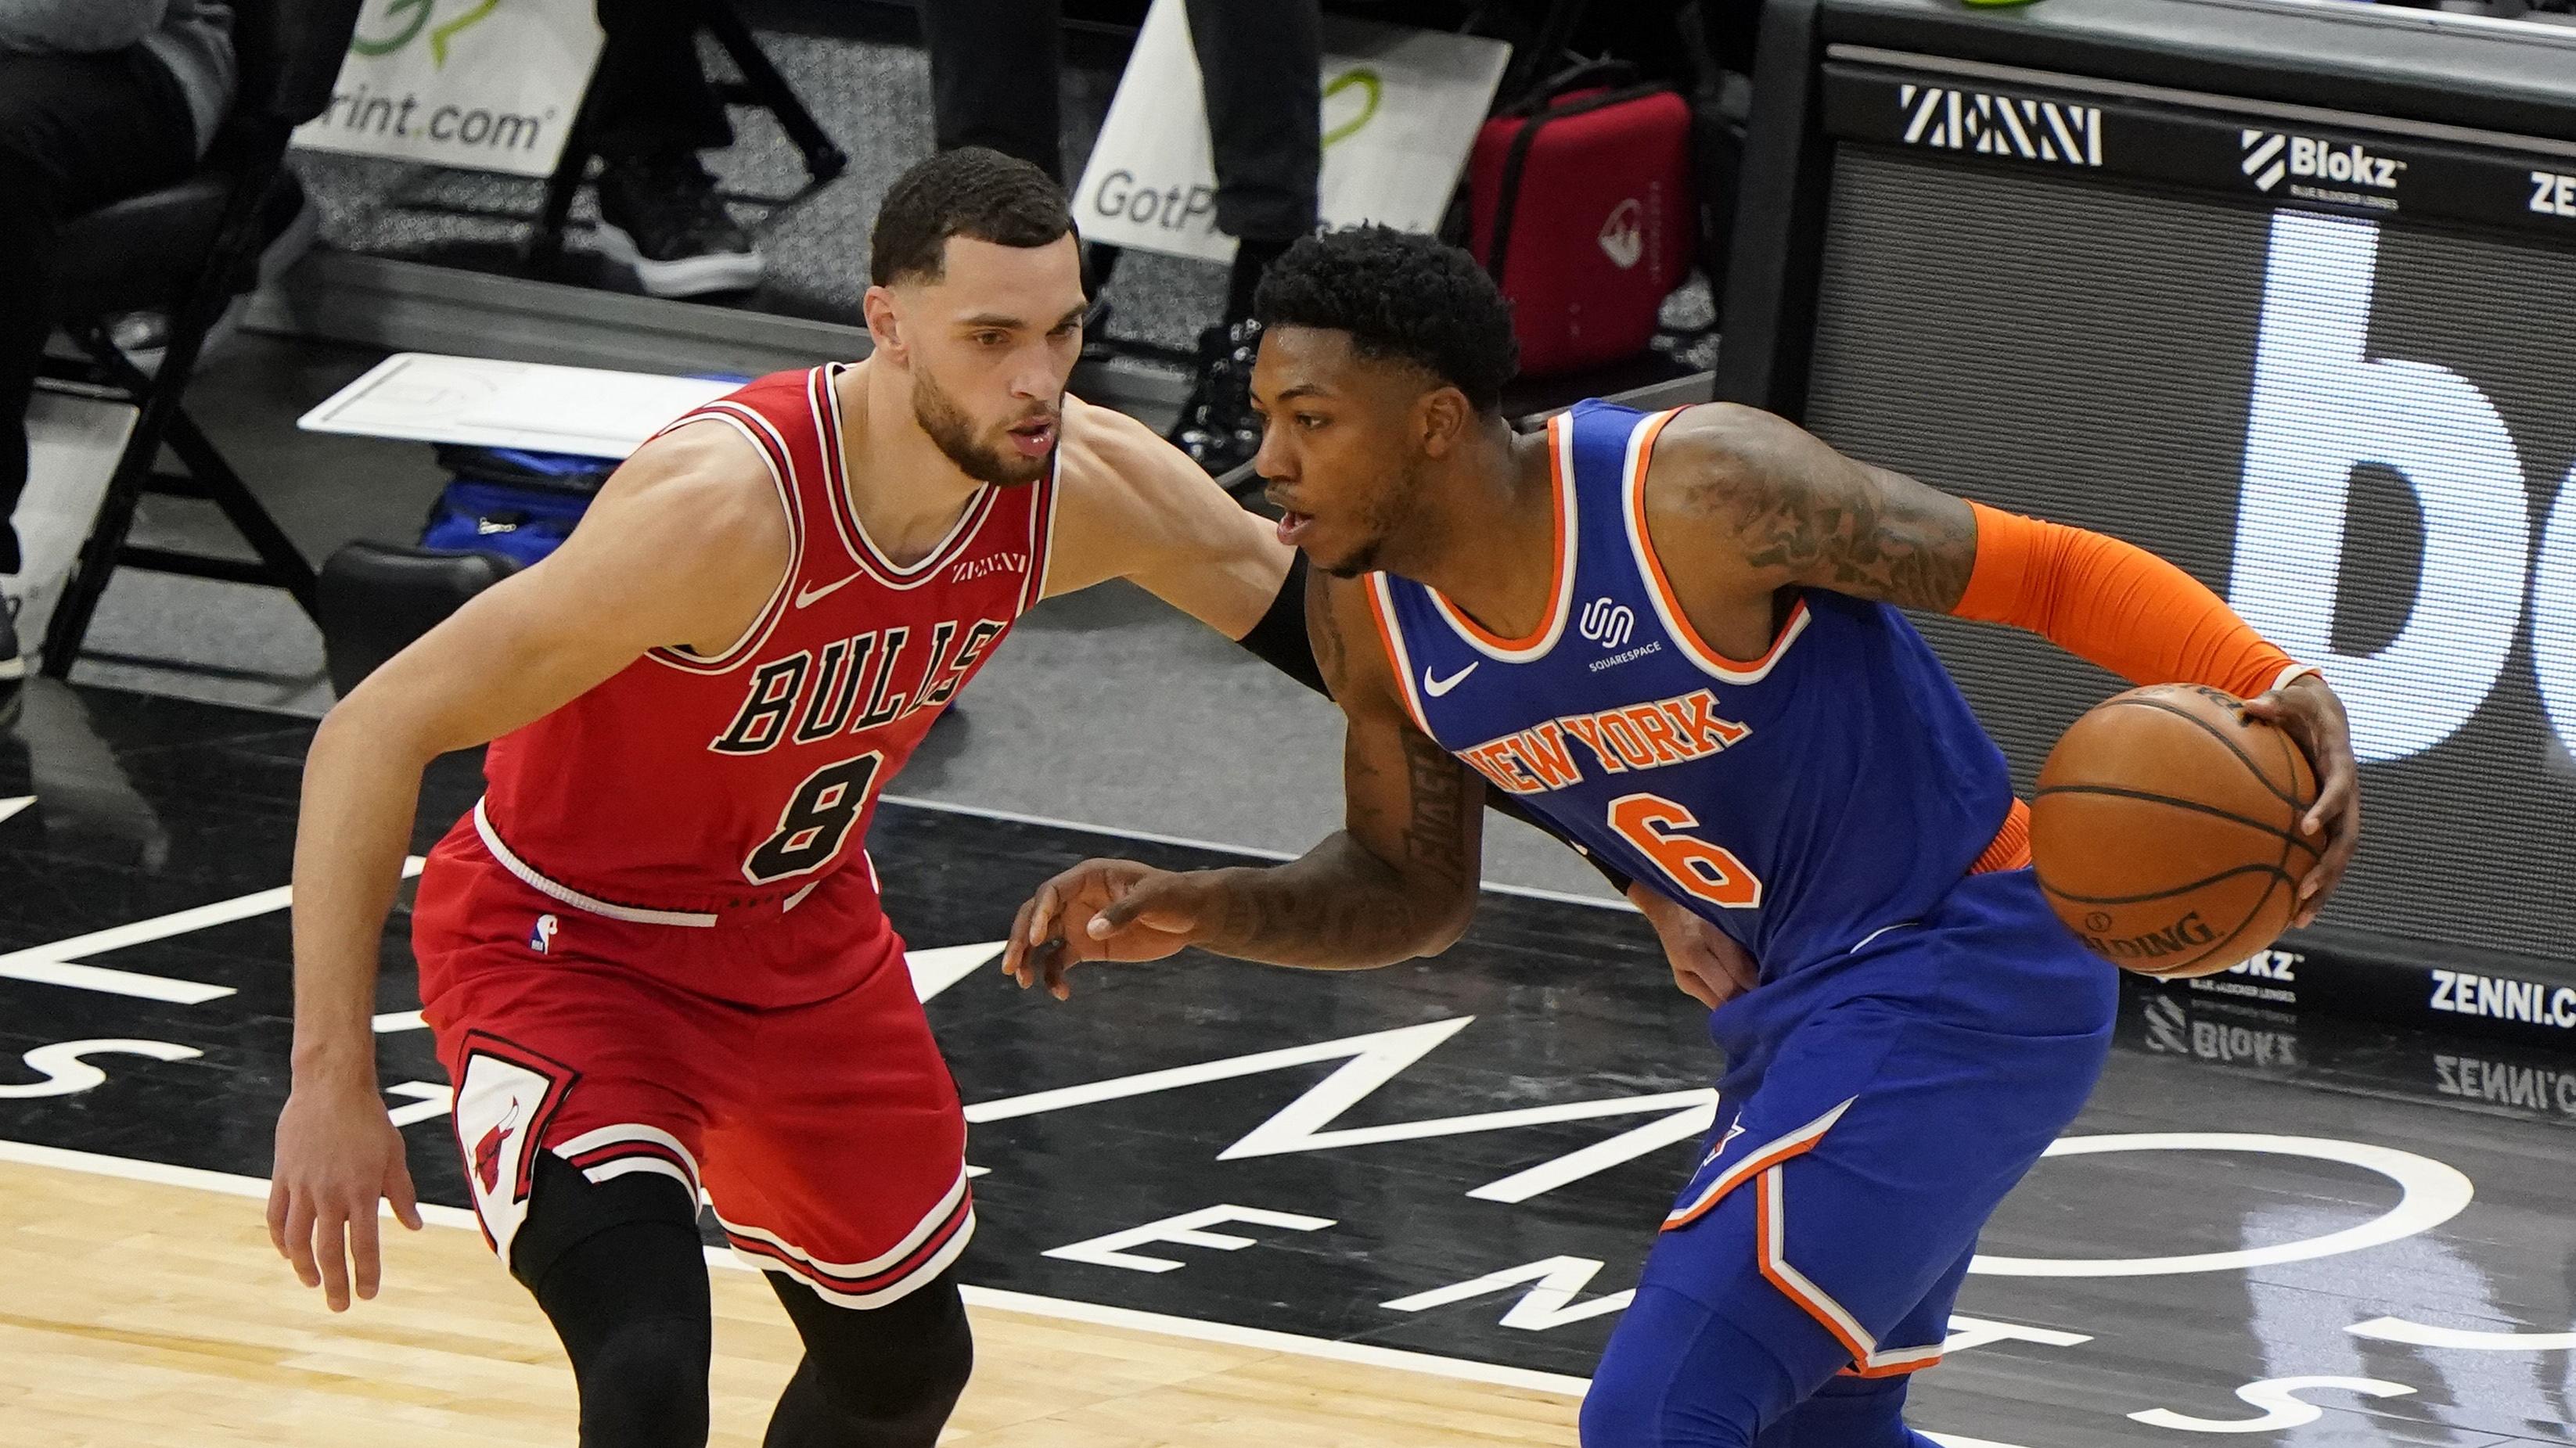 Feb 3, 2021; Chicago, Illinois, USA; New York Knicks guard Elfrid Payton (6) dribbles the ball against Chicago Bulls guard Zach LaVine (8) during the first quarter at the United Center. Mandatory Credit: Mike Dinovo-USA TODAY Sports / © Mike Dinovo-USA TODAY Sports